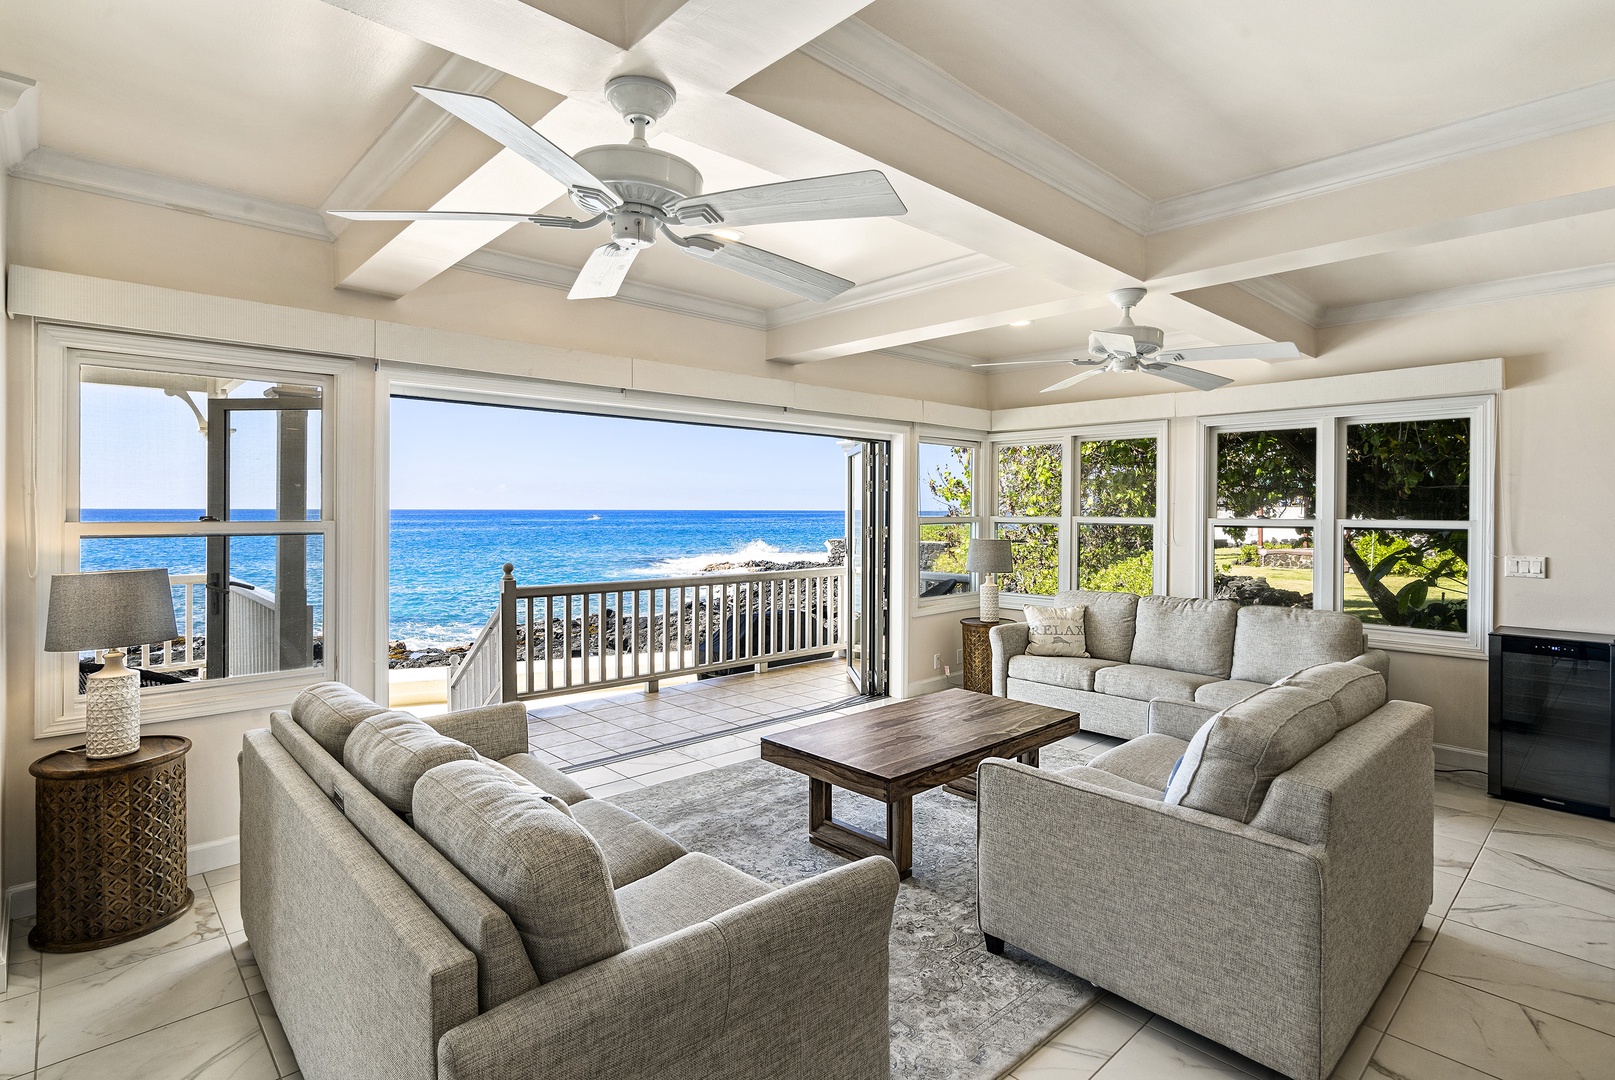 Kailua Kona Vacation Rentals, Dolphin Manor - Living room equipped with 2 Queen sleeper sofas